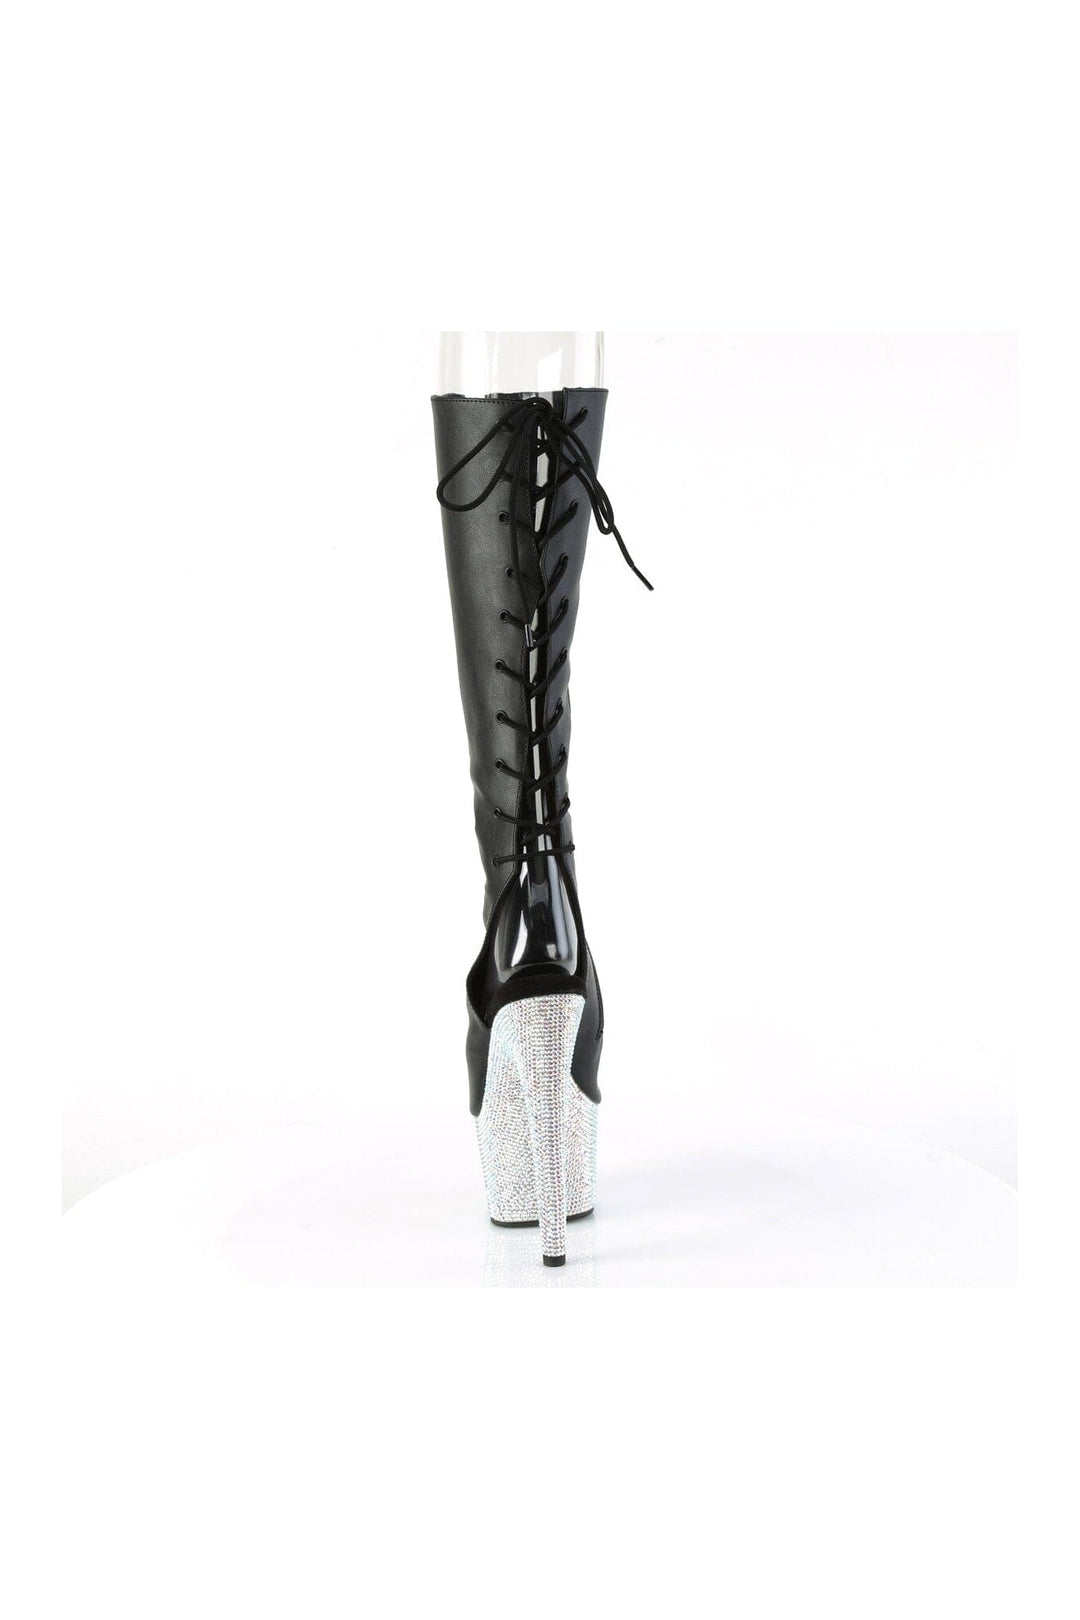 BEJEWELED-2018-7 Black Faux Leather Knee Boot-Knee Boots-Pleaser-SEXYSHOES.COM